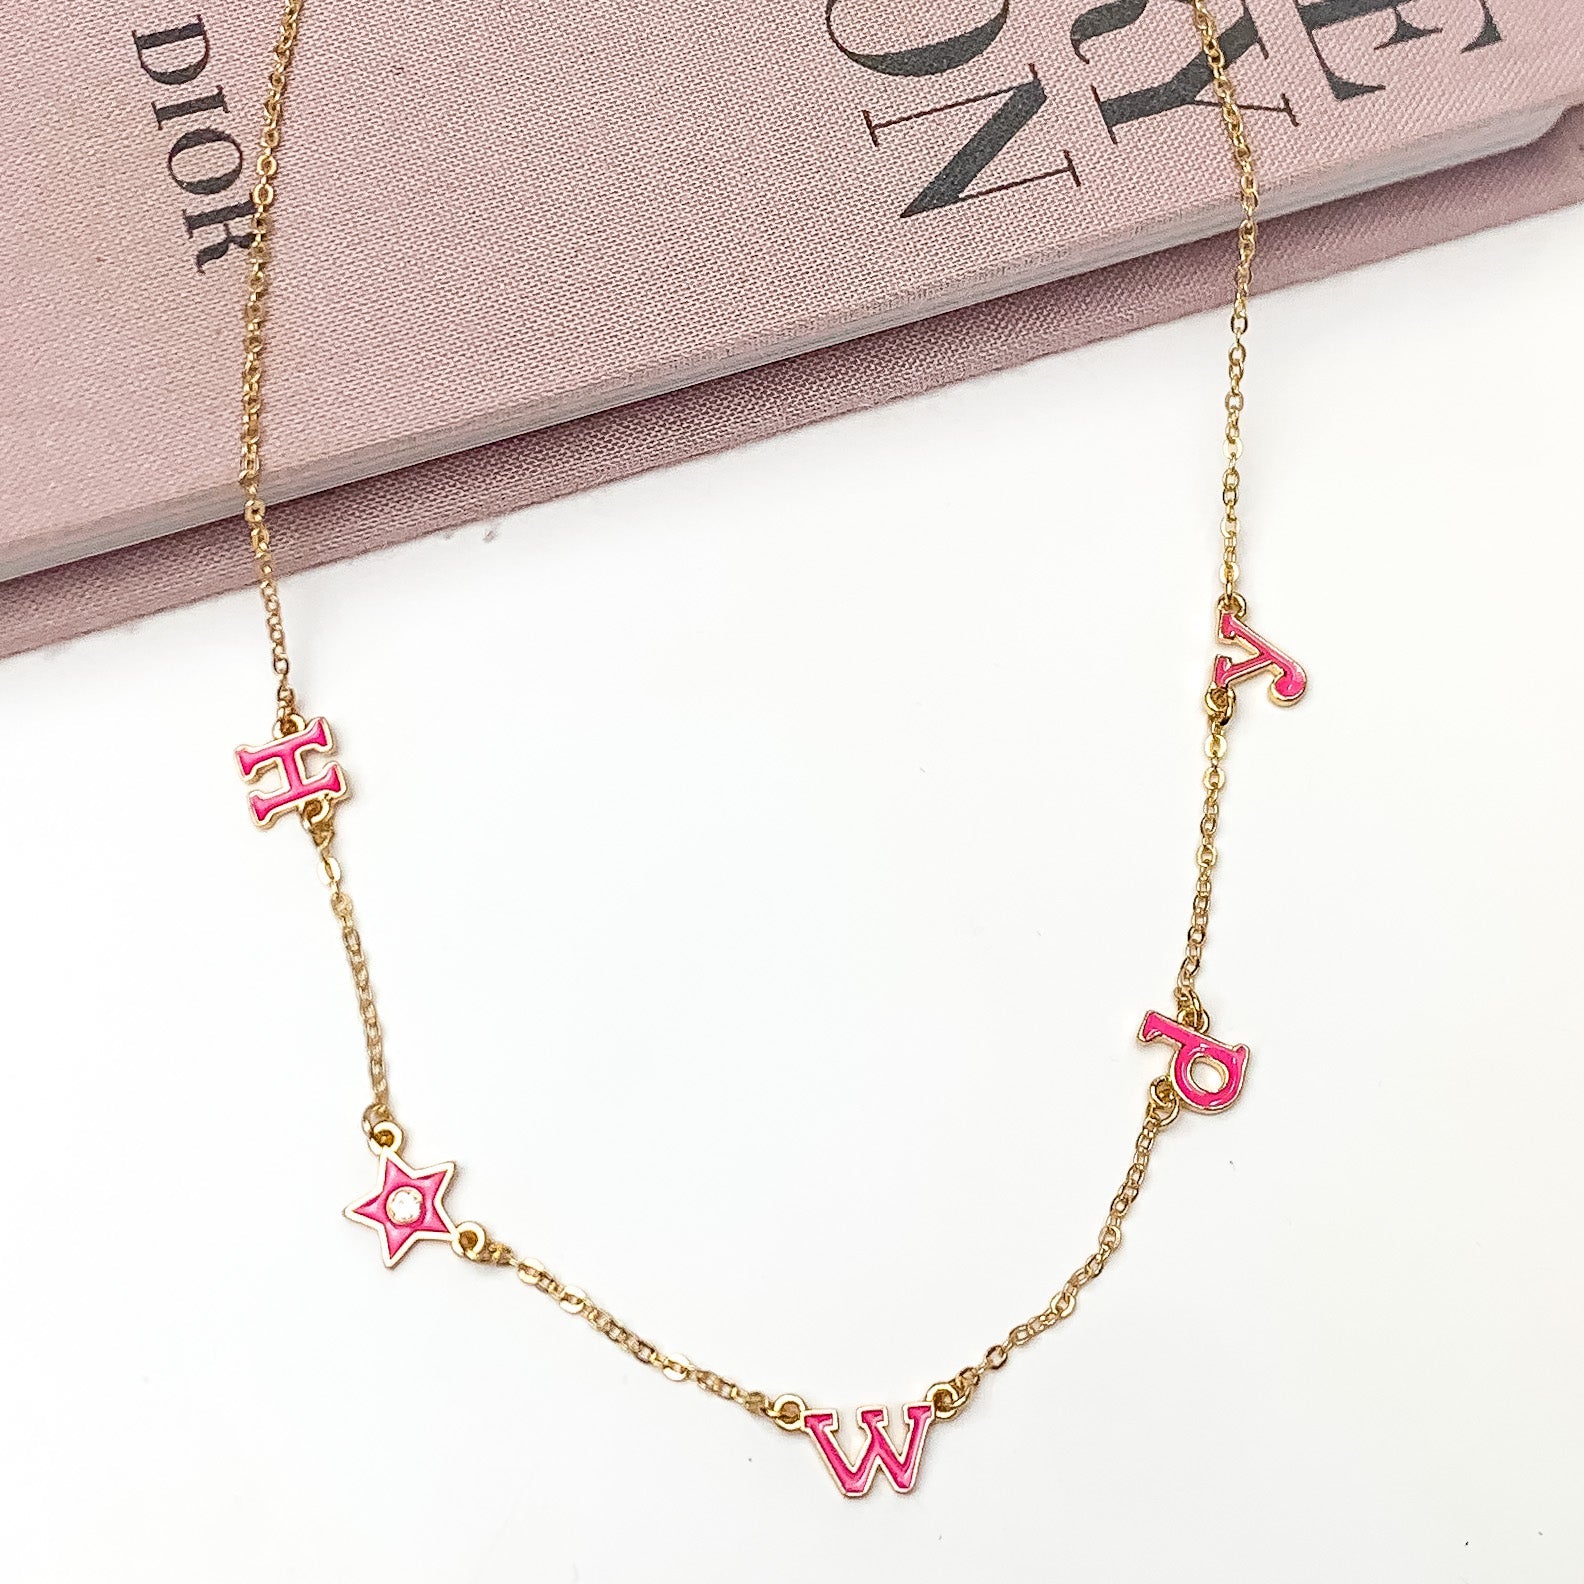 Howdy Gold Tone Chain Necklace in Dark Pink. Pictured on a white background with the top of the necklace laying on a book.